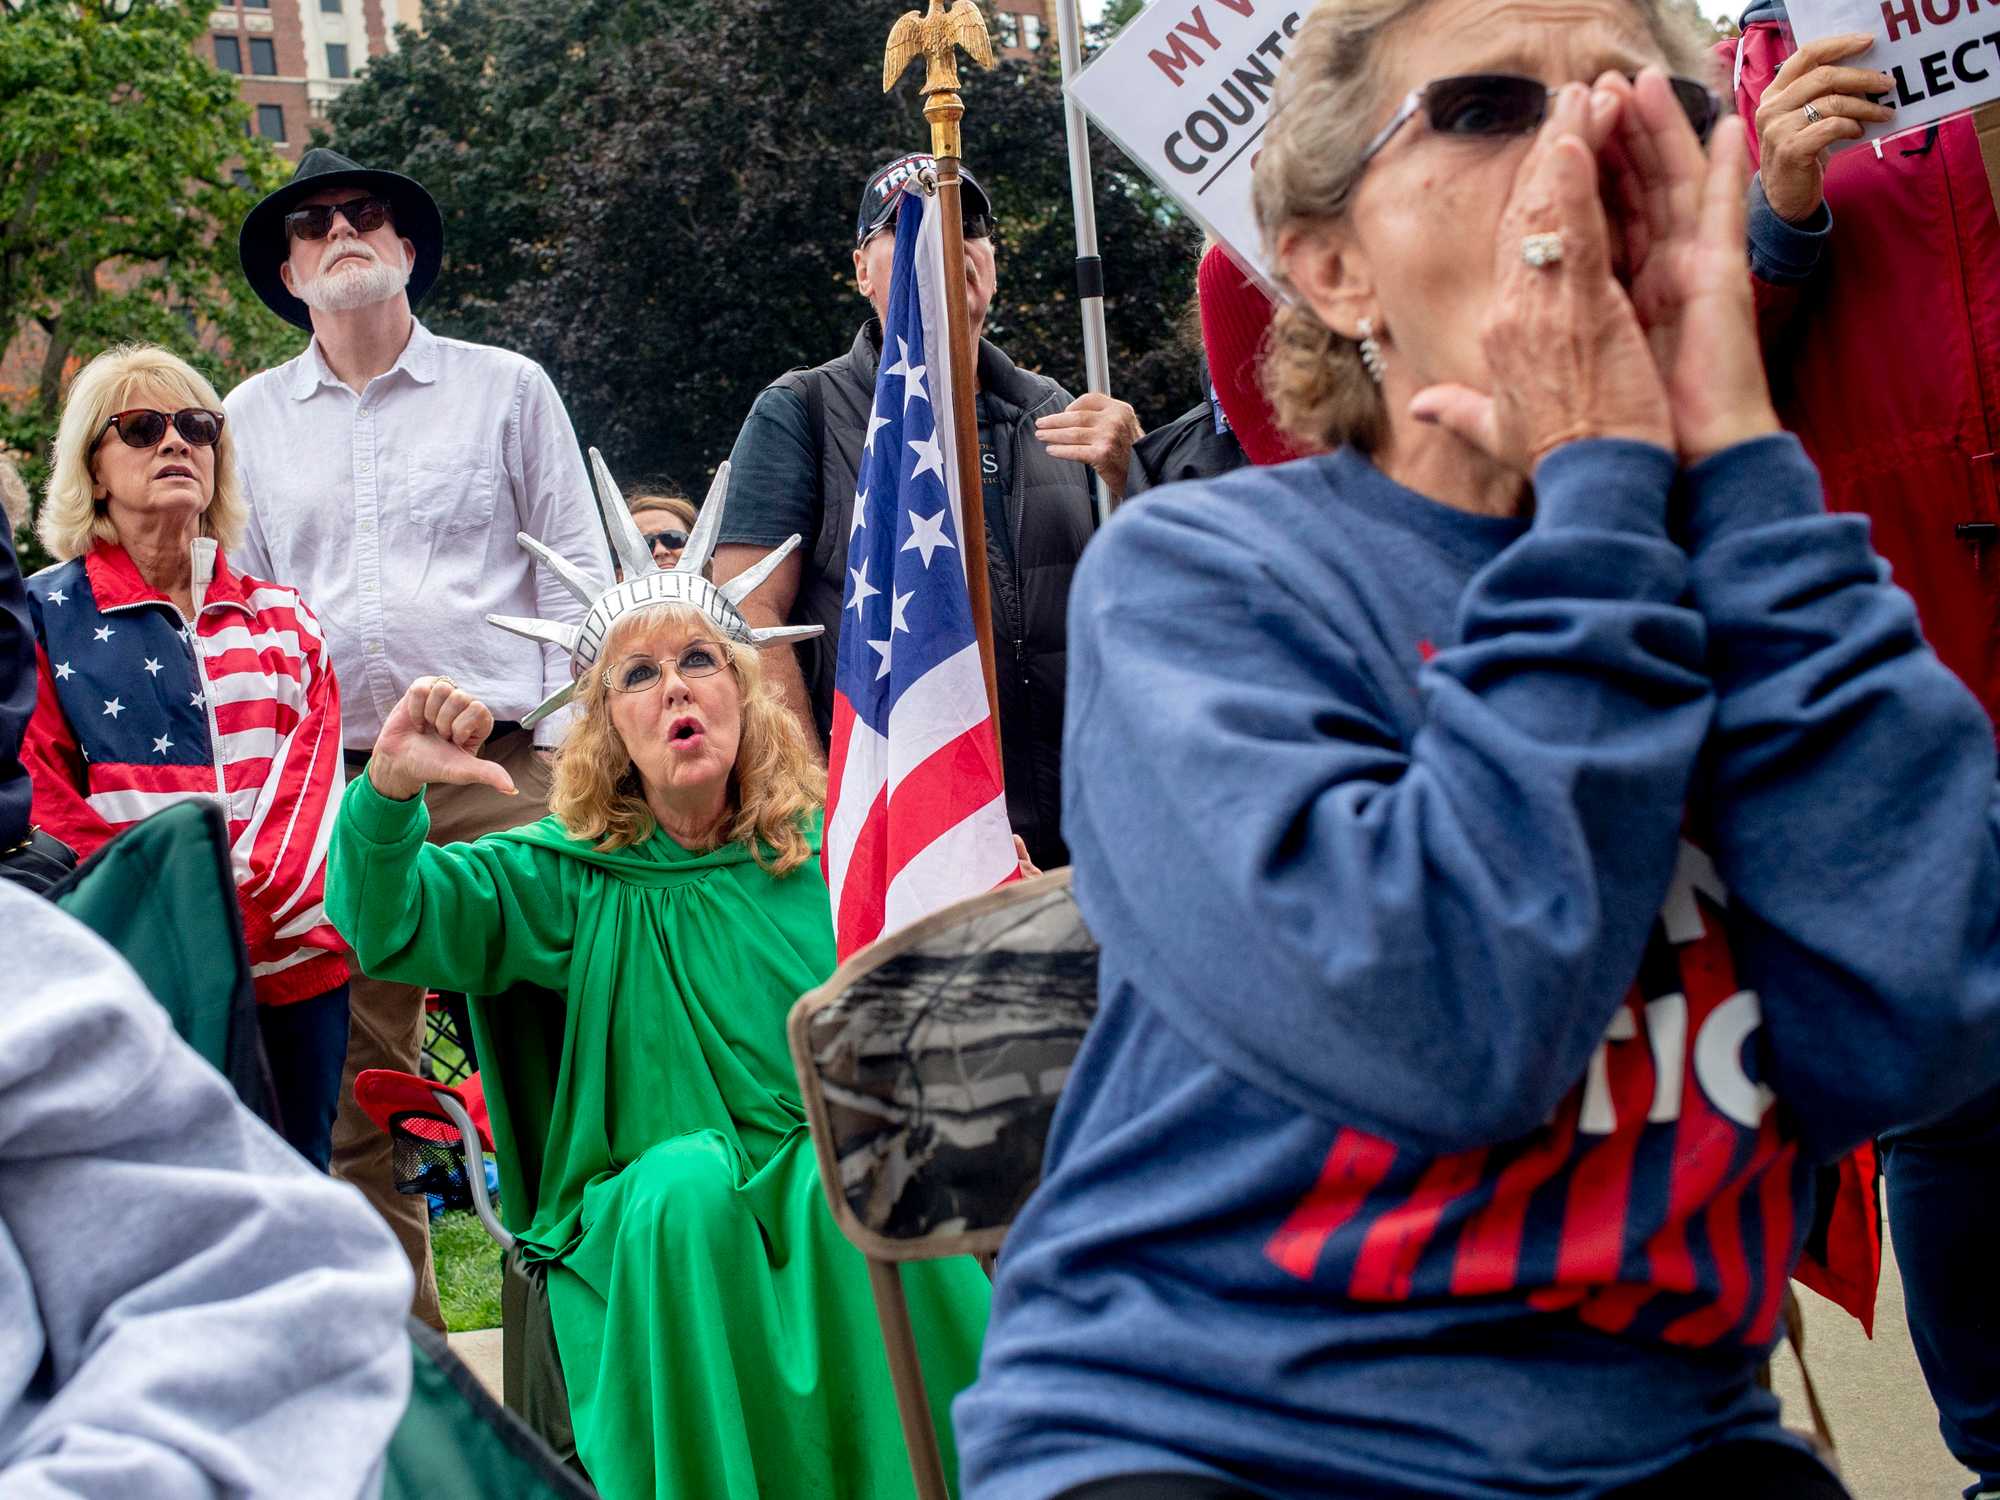 Macomb County resident Carol Reed booed while wearing a "Lady Liberty" costume along with Judy Adams, of Durand, during a rally at the Michigan State Capitol on Oct. 12, 2021, in Lansing. The event, organized by a group called Election Integrity Fund and Force, was demanding a "forensic audit" of the state's 2020 presidential election results. 